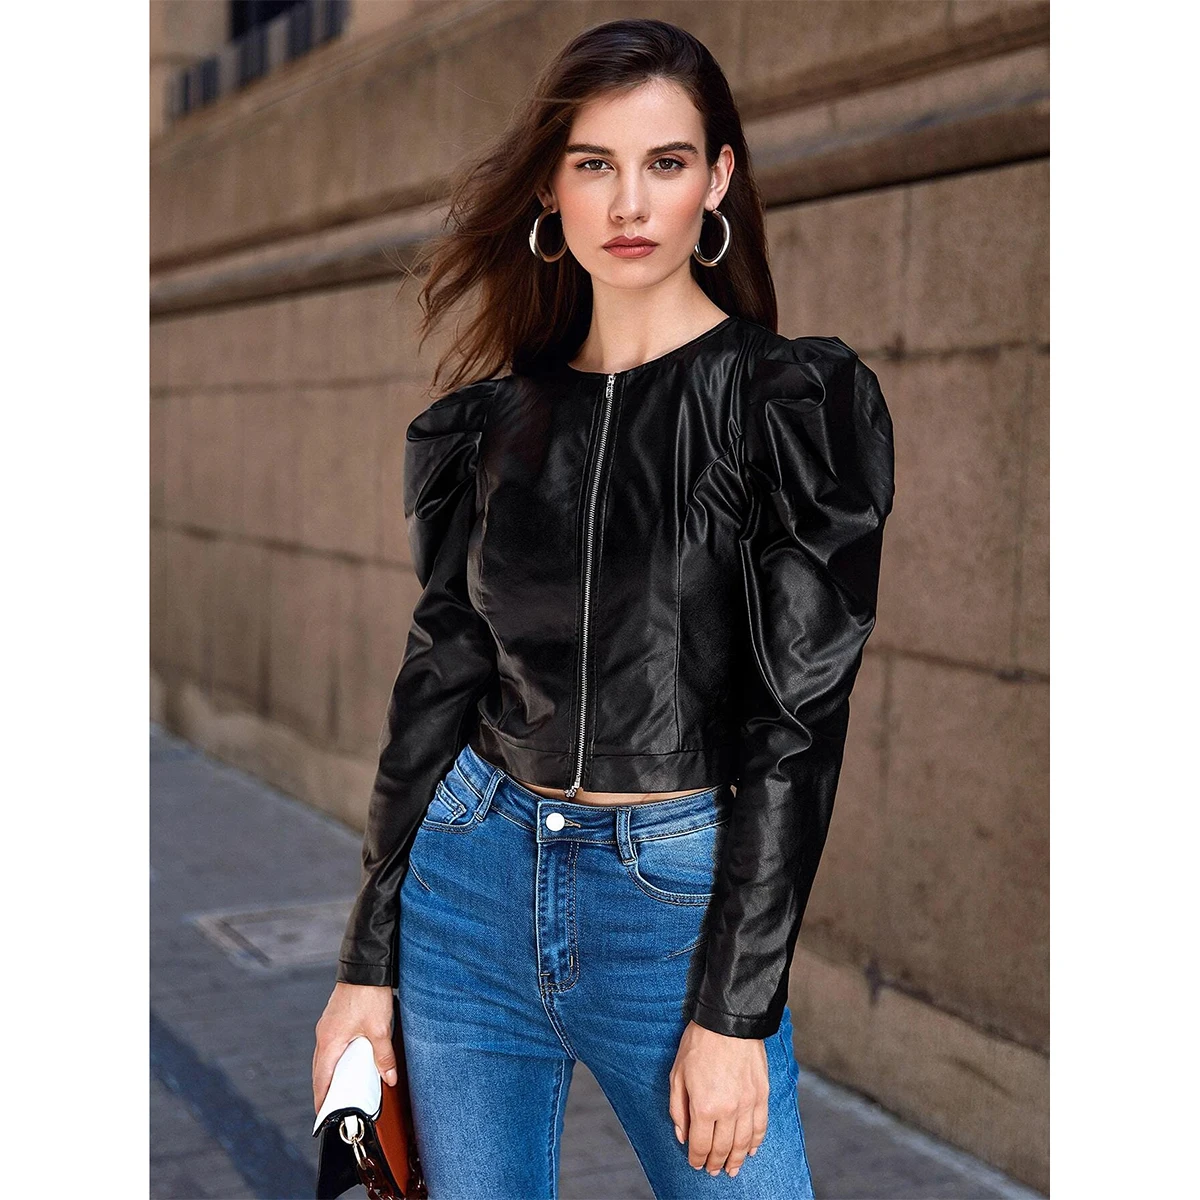 

Women Zip Up PU Leather Jacket, Leg-of-mutton Long Sleeve Cropped Coat, Solid Color Outfit for Autumn Winter